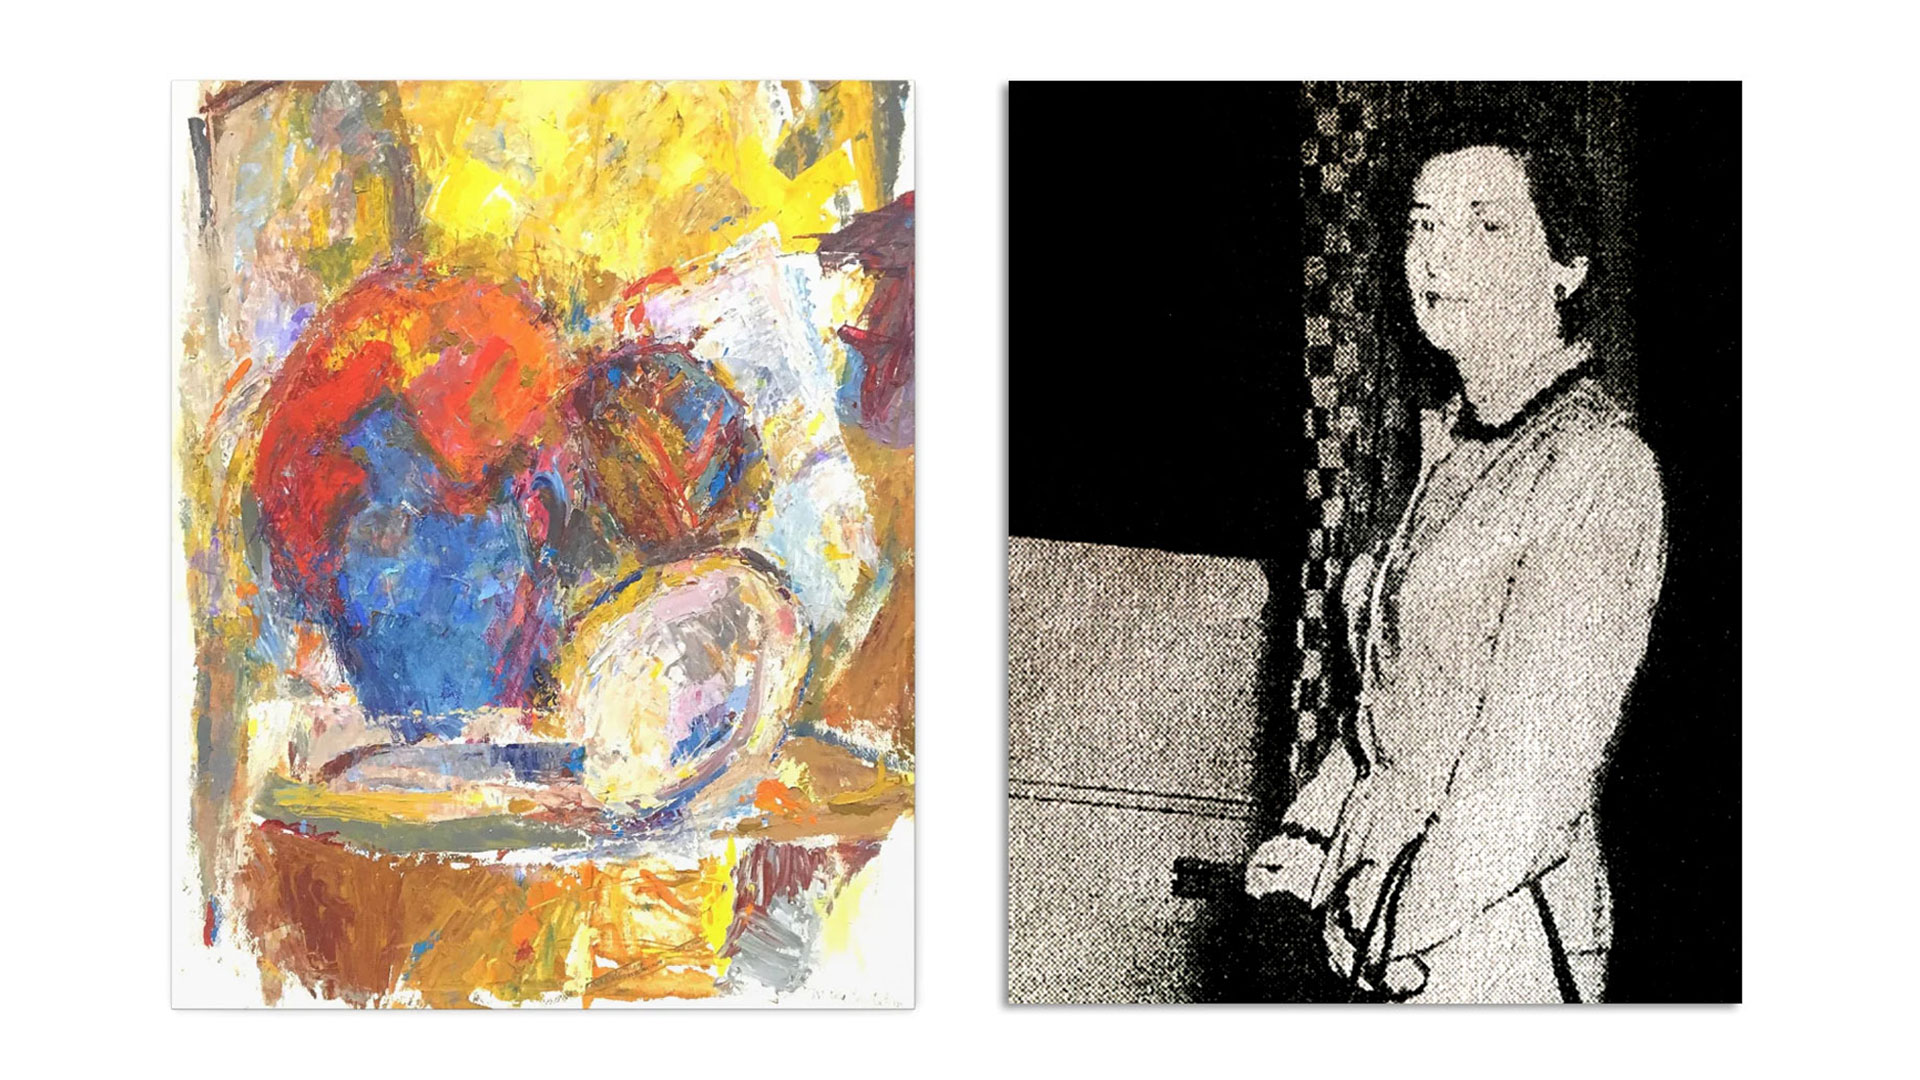 Late semi-abstract still life painting by Mildred Chalrap Cohen and photo of Mildred Charlap Cohen in her 30s.